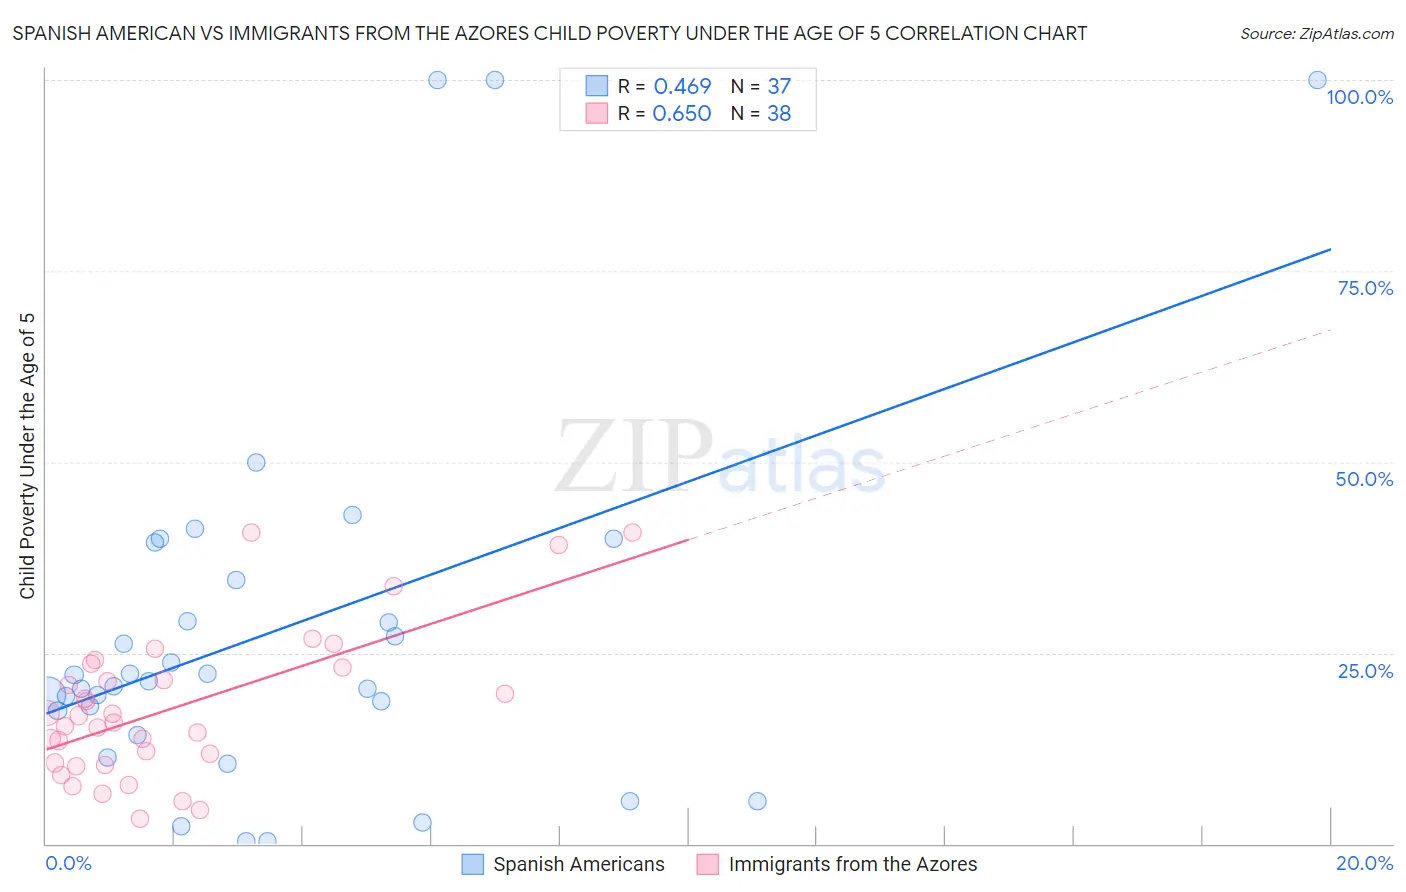 Spanish American vs Immigrants from the Azores Child Poverty Under the Age of 5